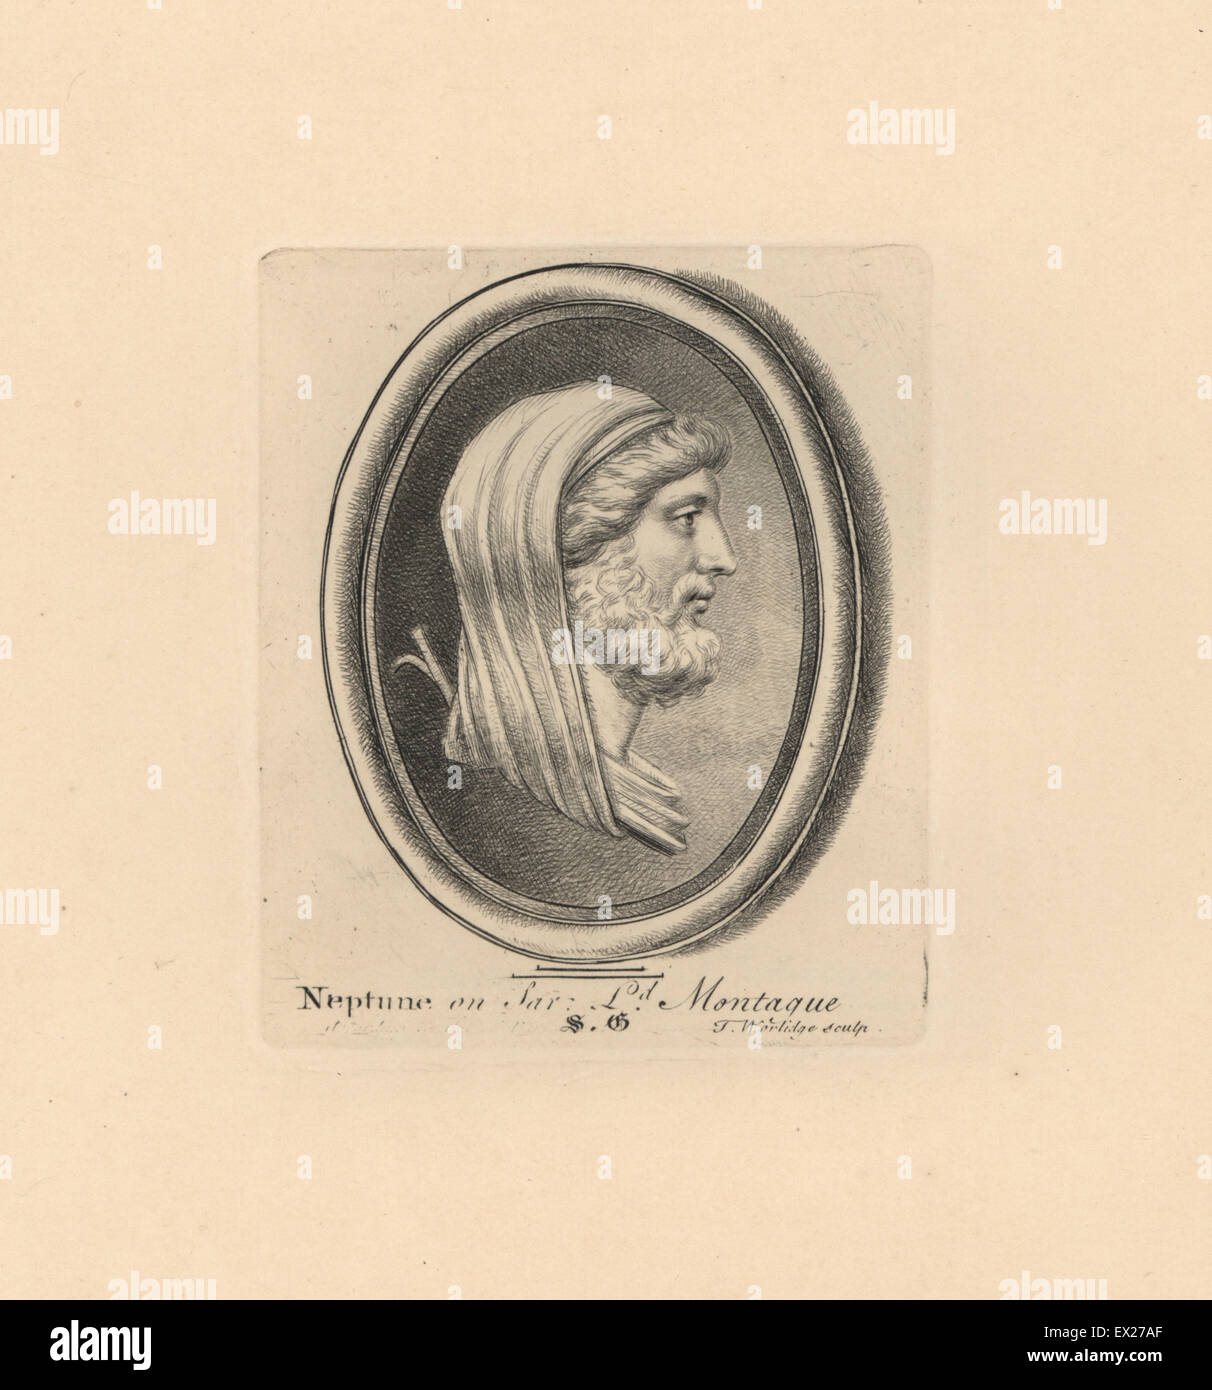 Portrait of Neptune, Roman god of the sea, on sard from Lord Montague's collection. Copperplate engraving by Thomas Worlidge from James Vallentin's One Hundred and Eight Engravings from Antique Gems, 1863. Stock Photo